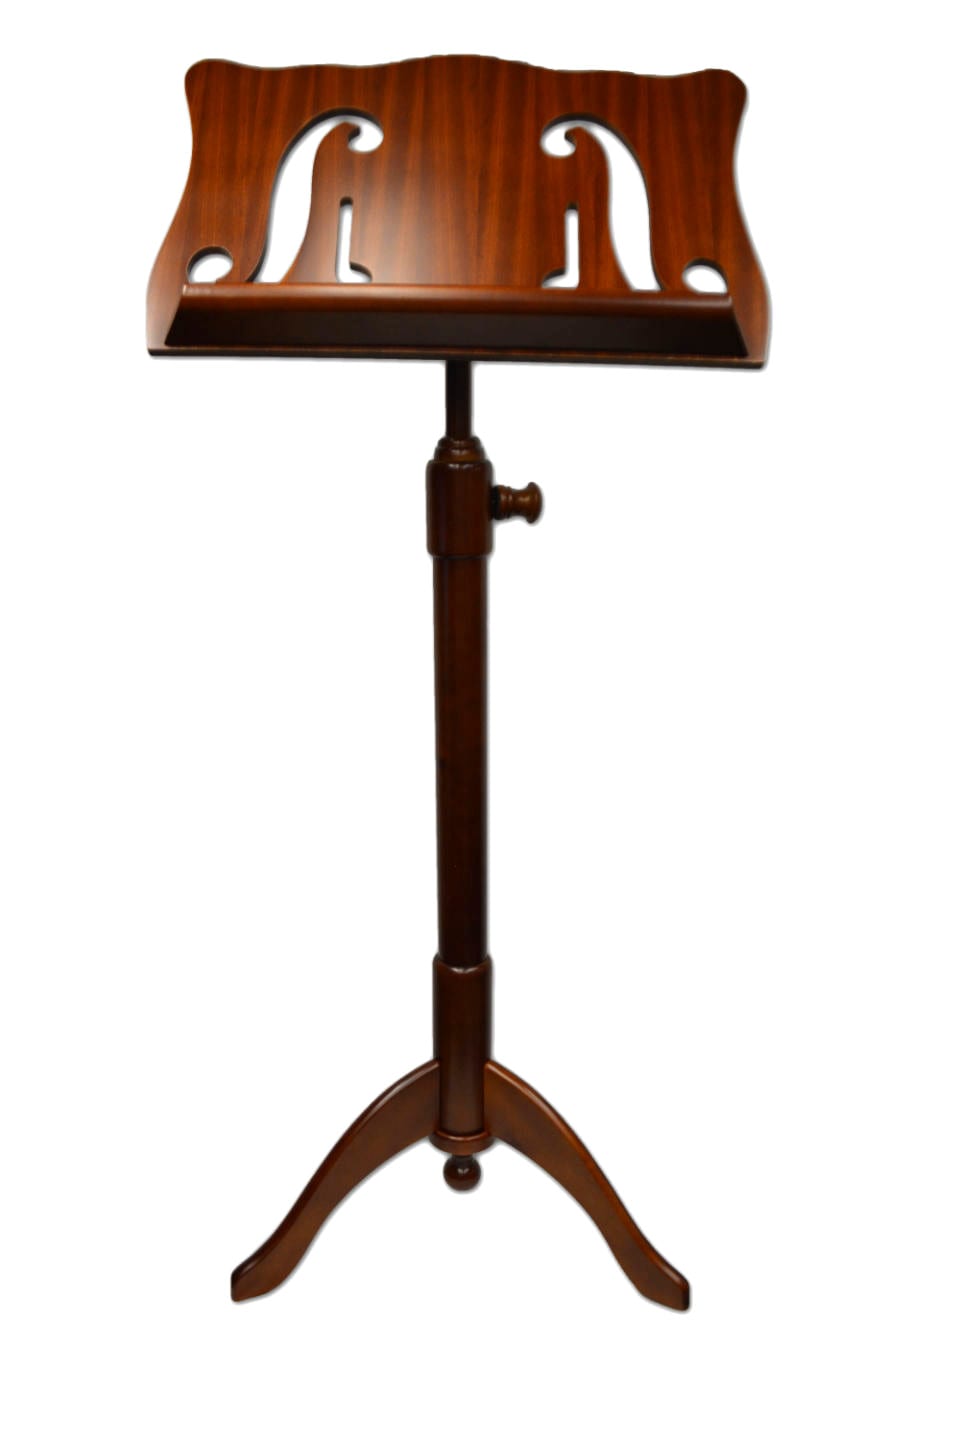  Frederick Walnut Music Stand - Violin F-Holes & Music Notes